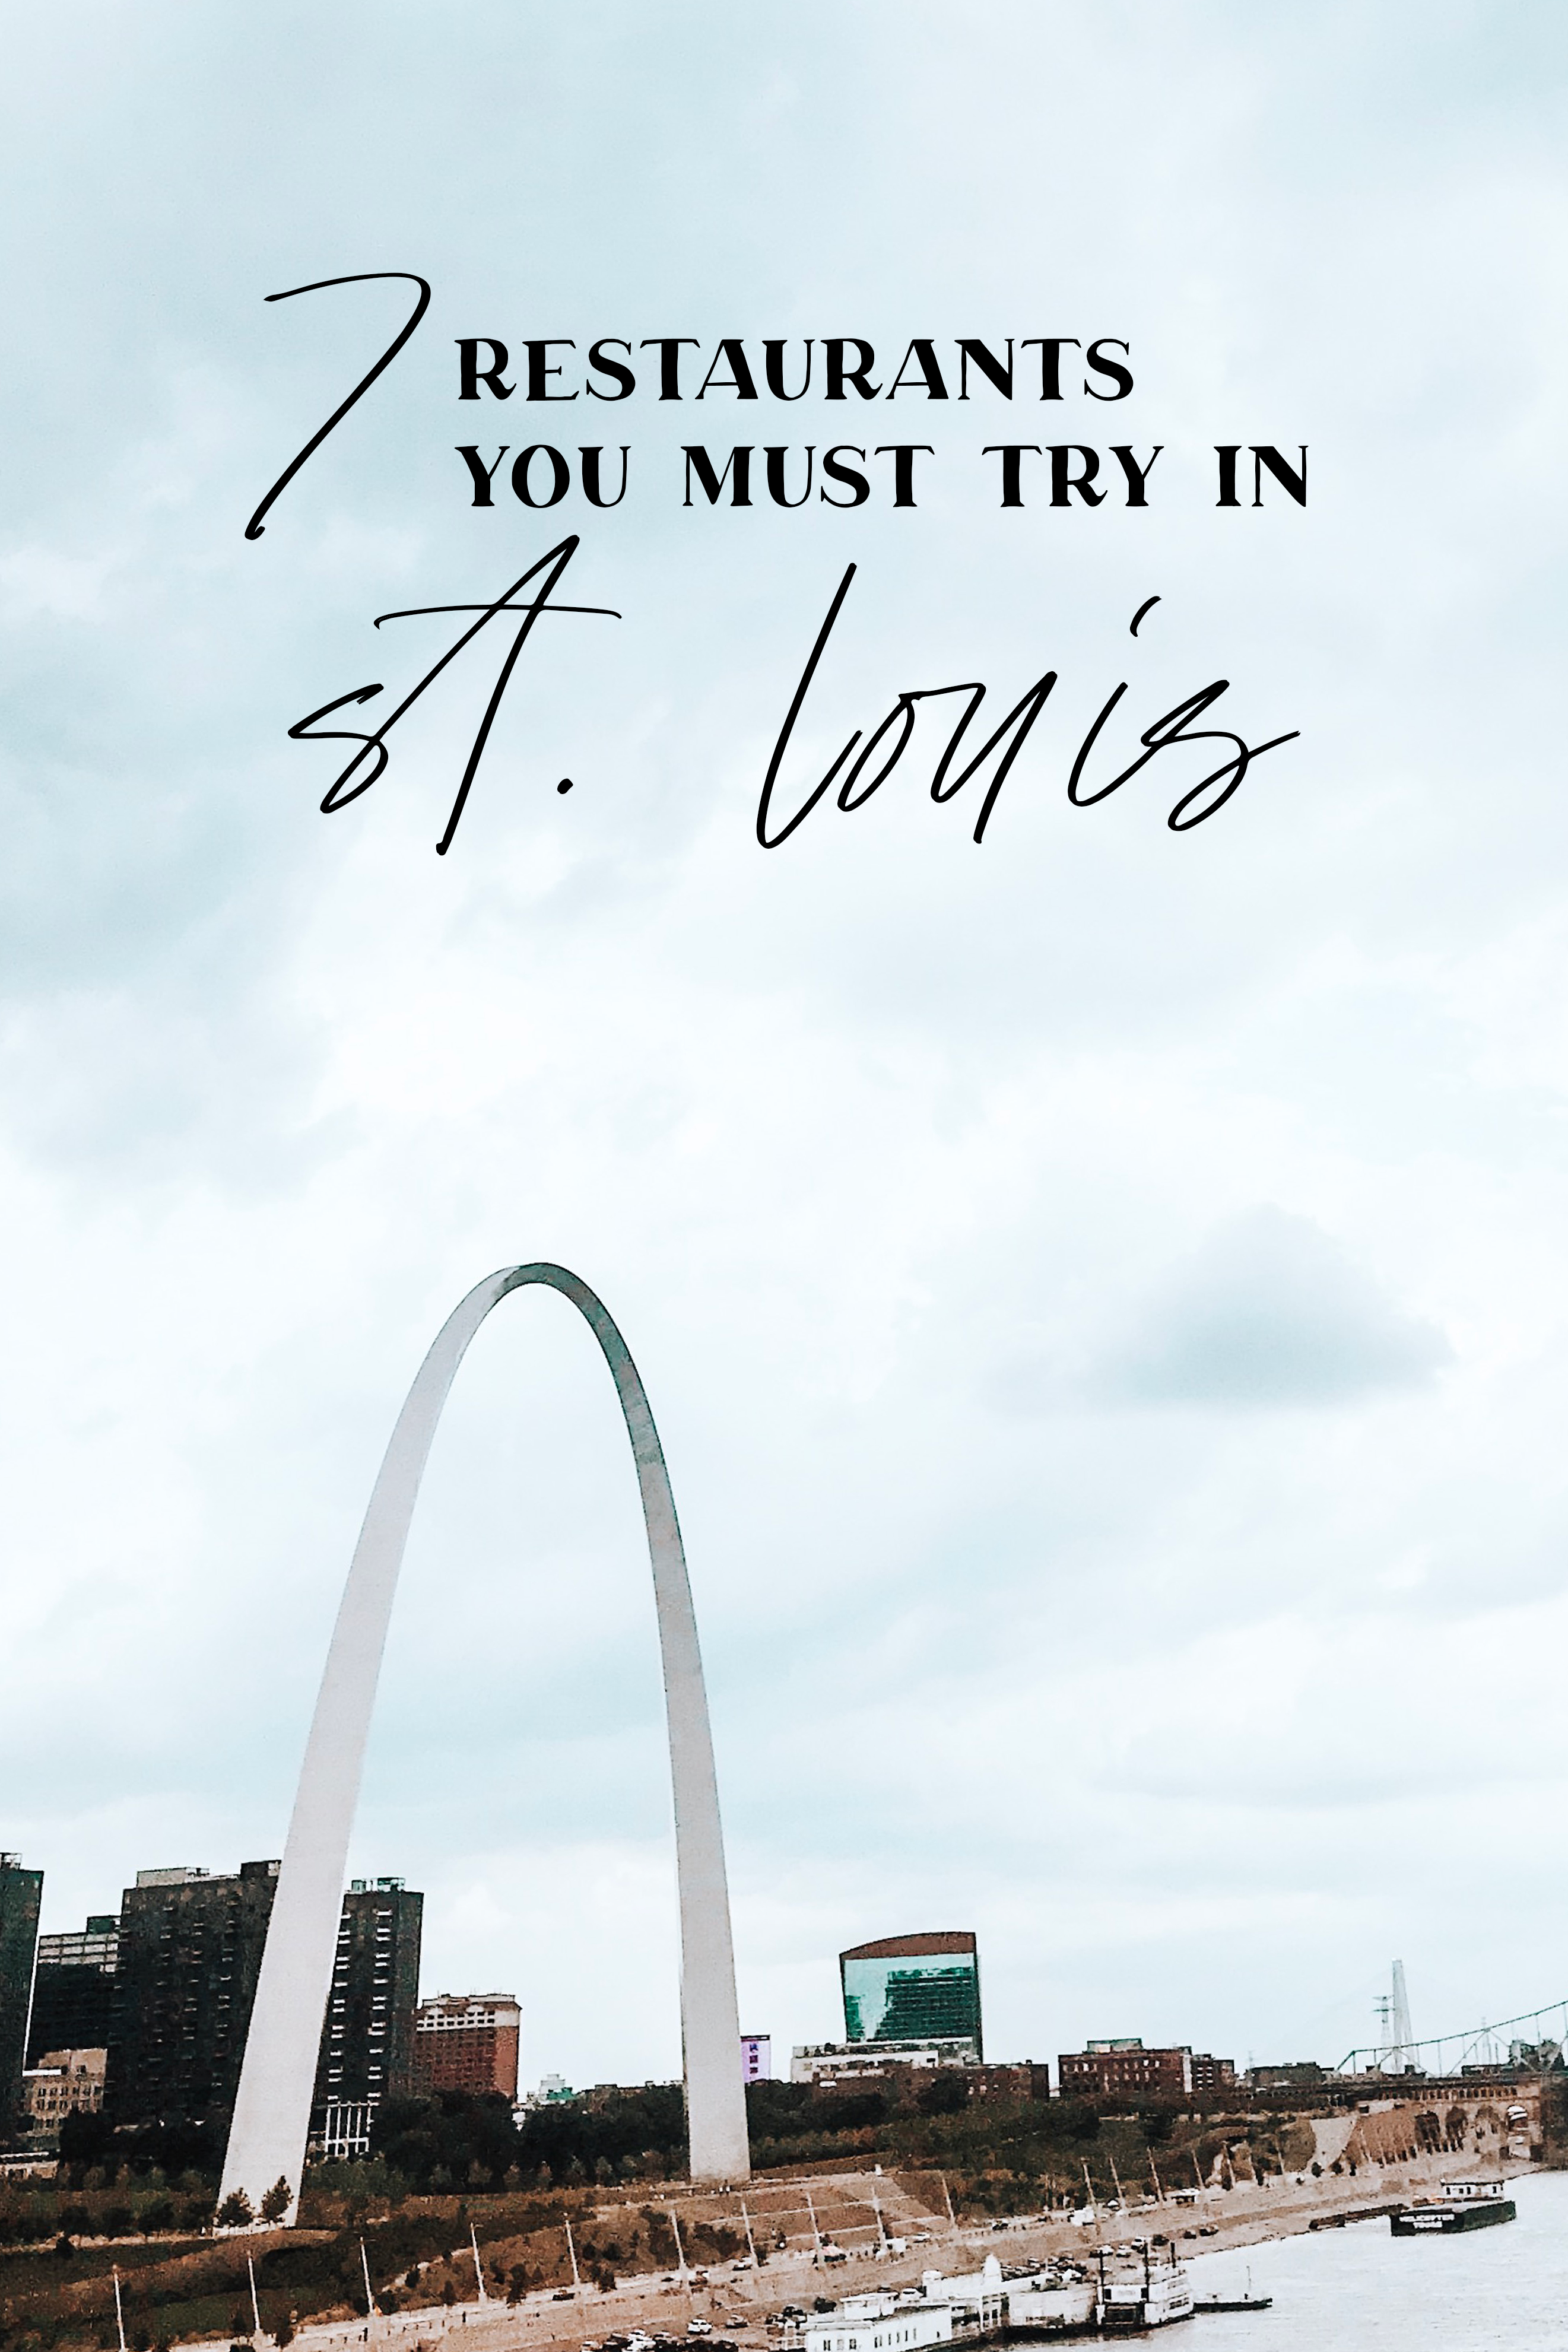 7 Restaurants you must try in St Louis MO